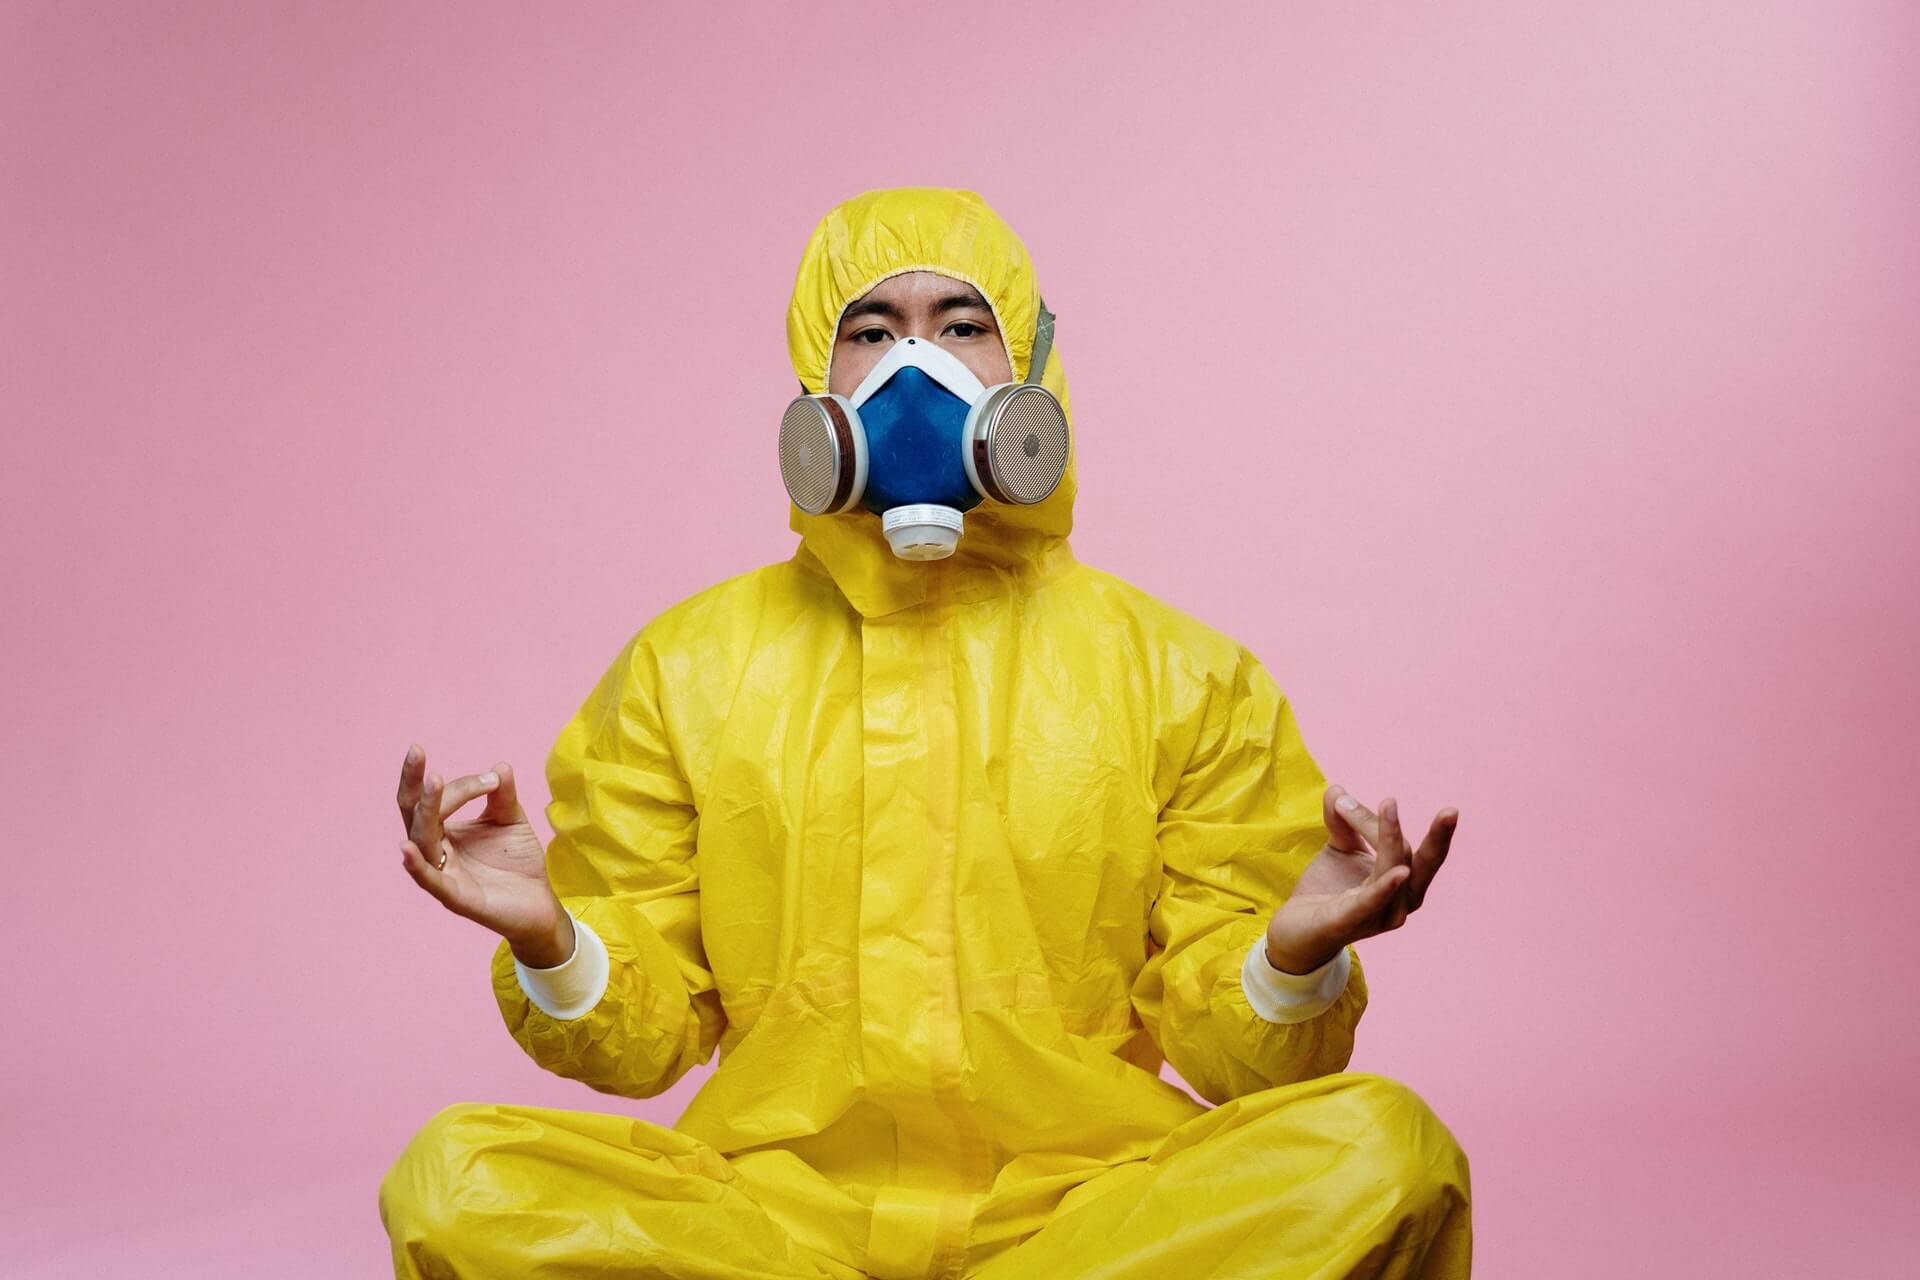 man sitting down with peace fingers in yellow hazmat suit and respirator